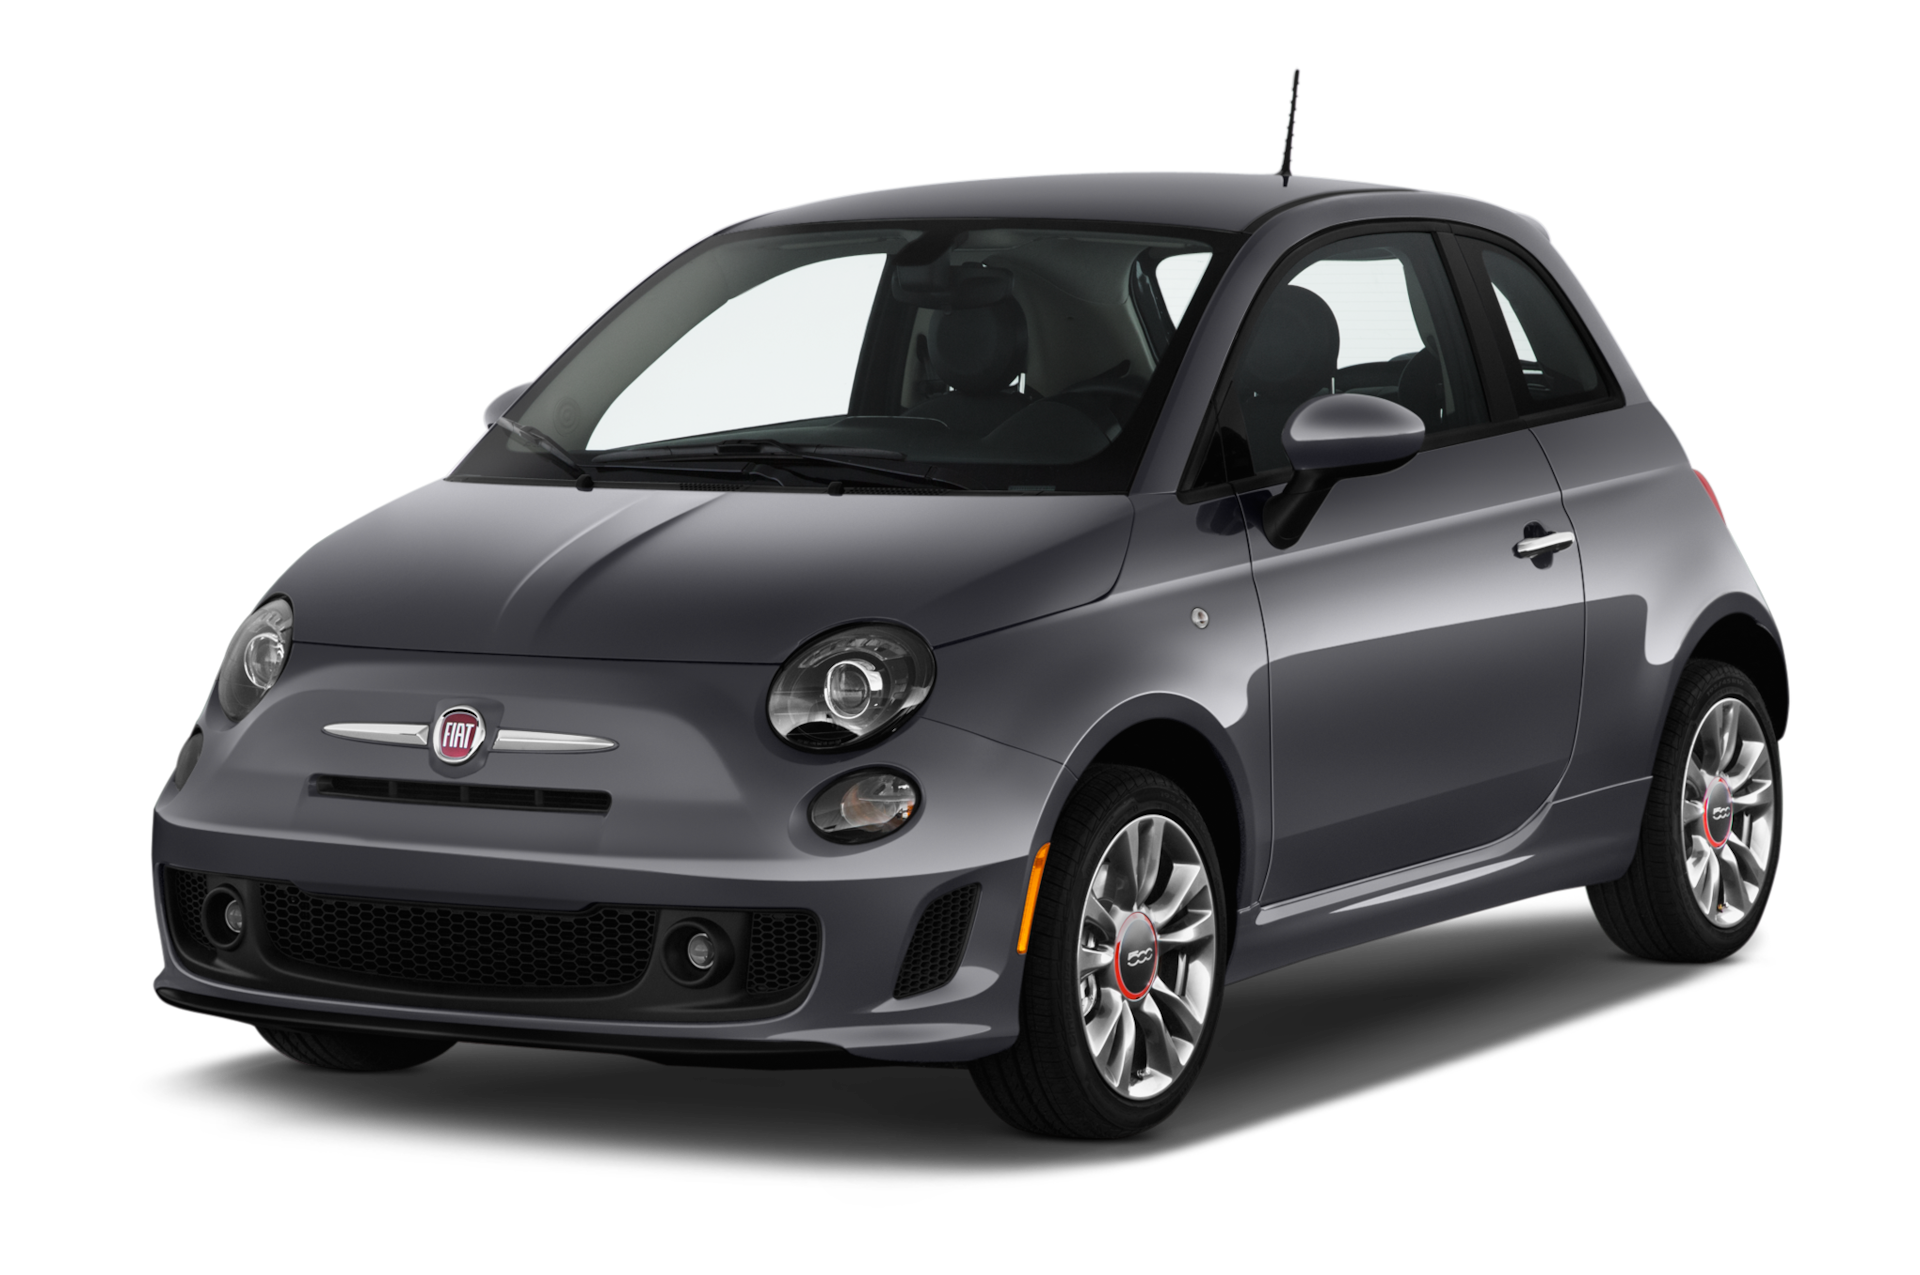 2019 FIAT 500 Prices, Reviews, and Photos - MotorTrend